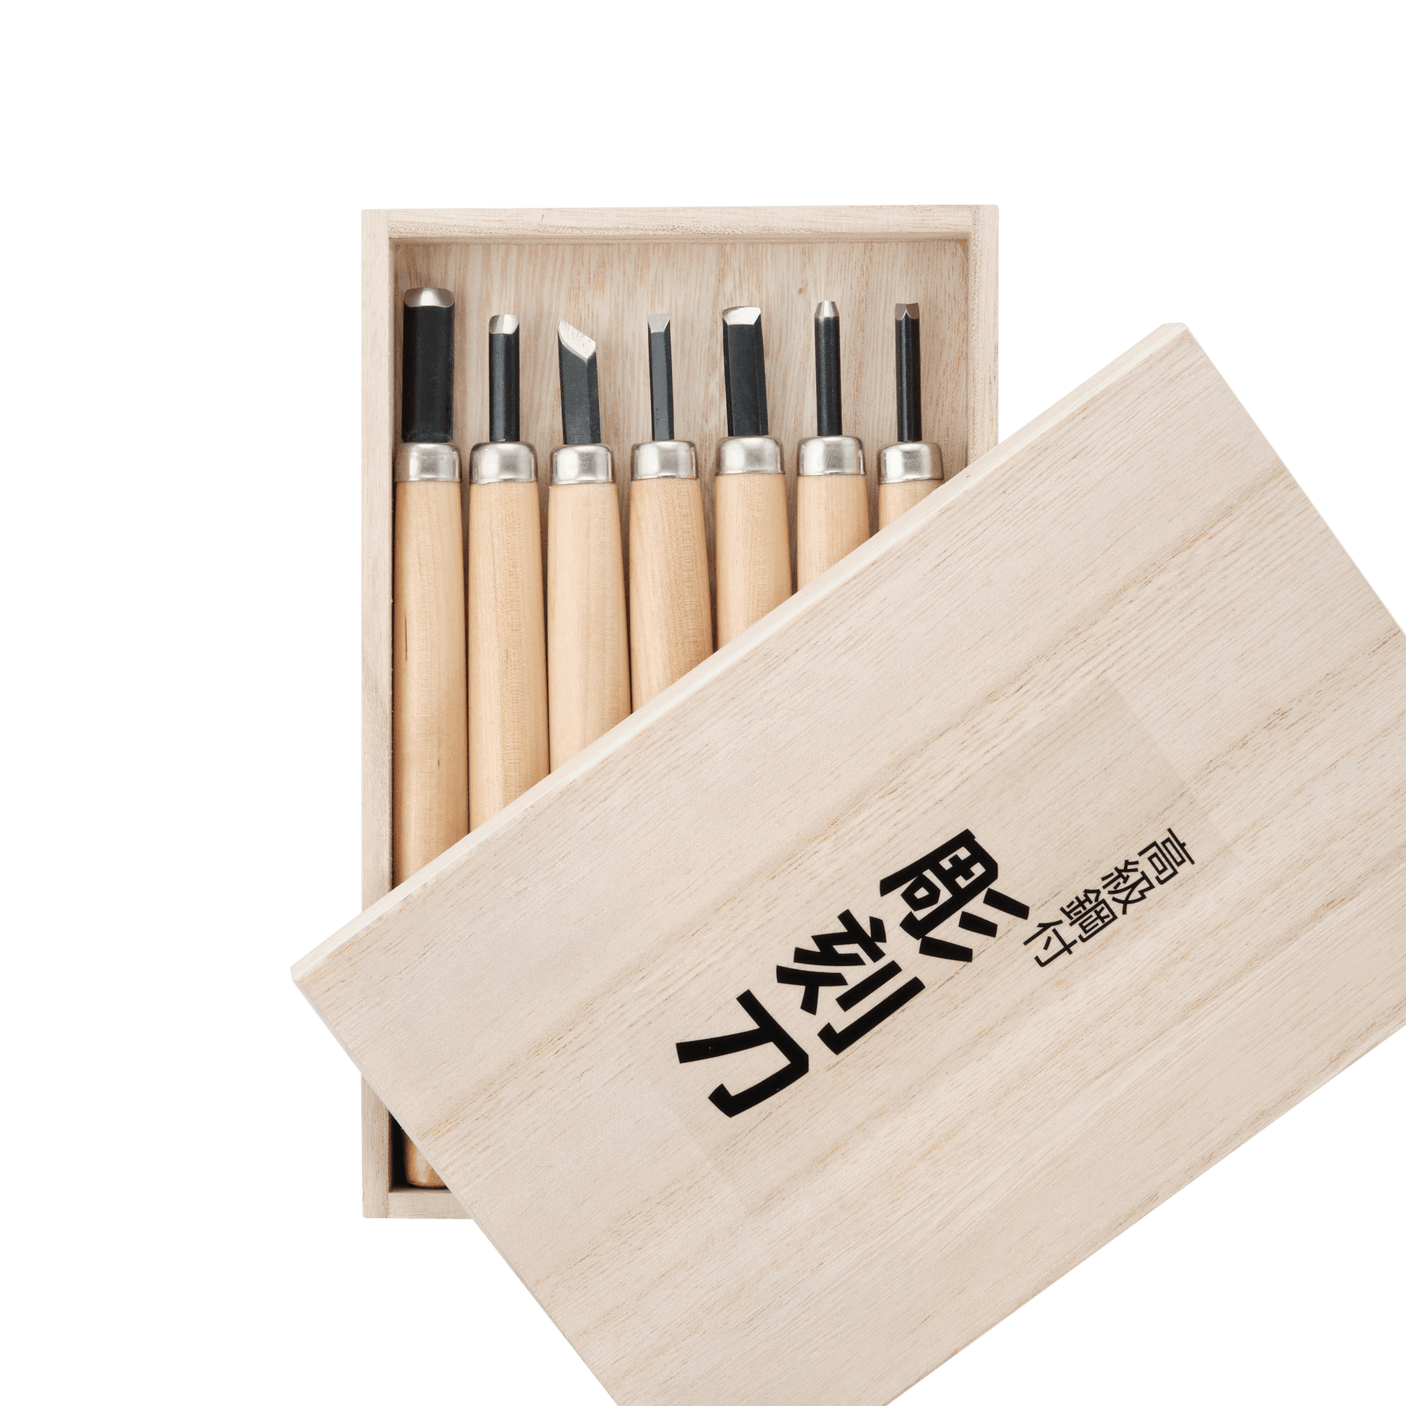 Chicky 7 Piece Carving Set - Carving Sets - Japanese Tools Australia